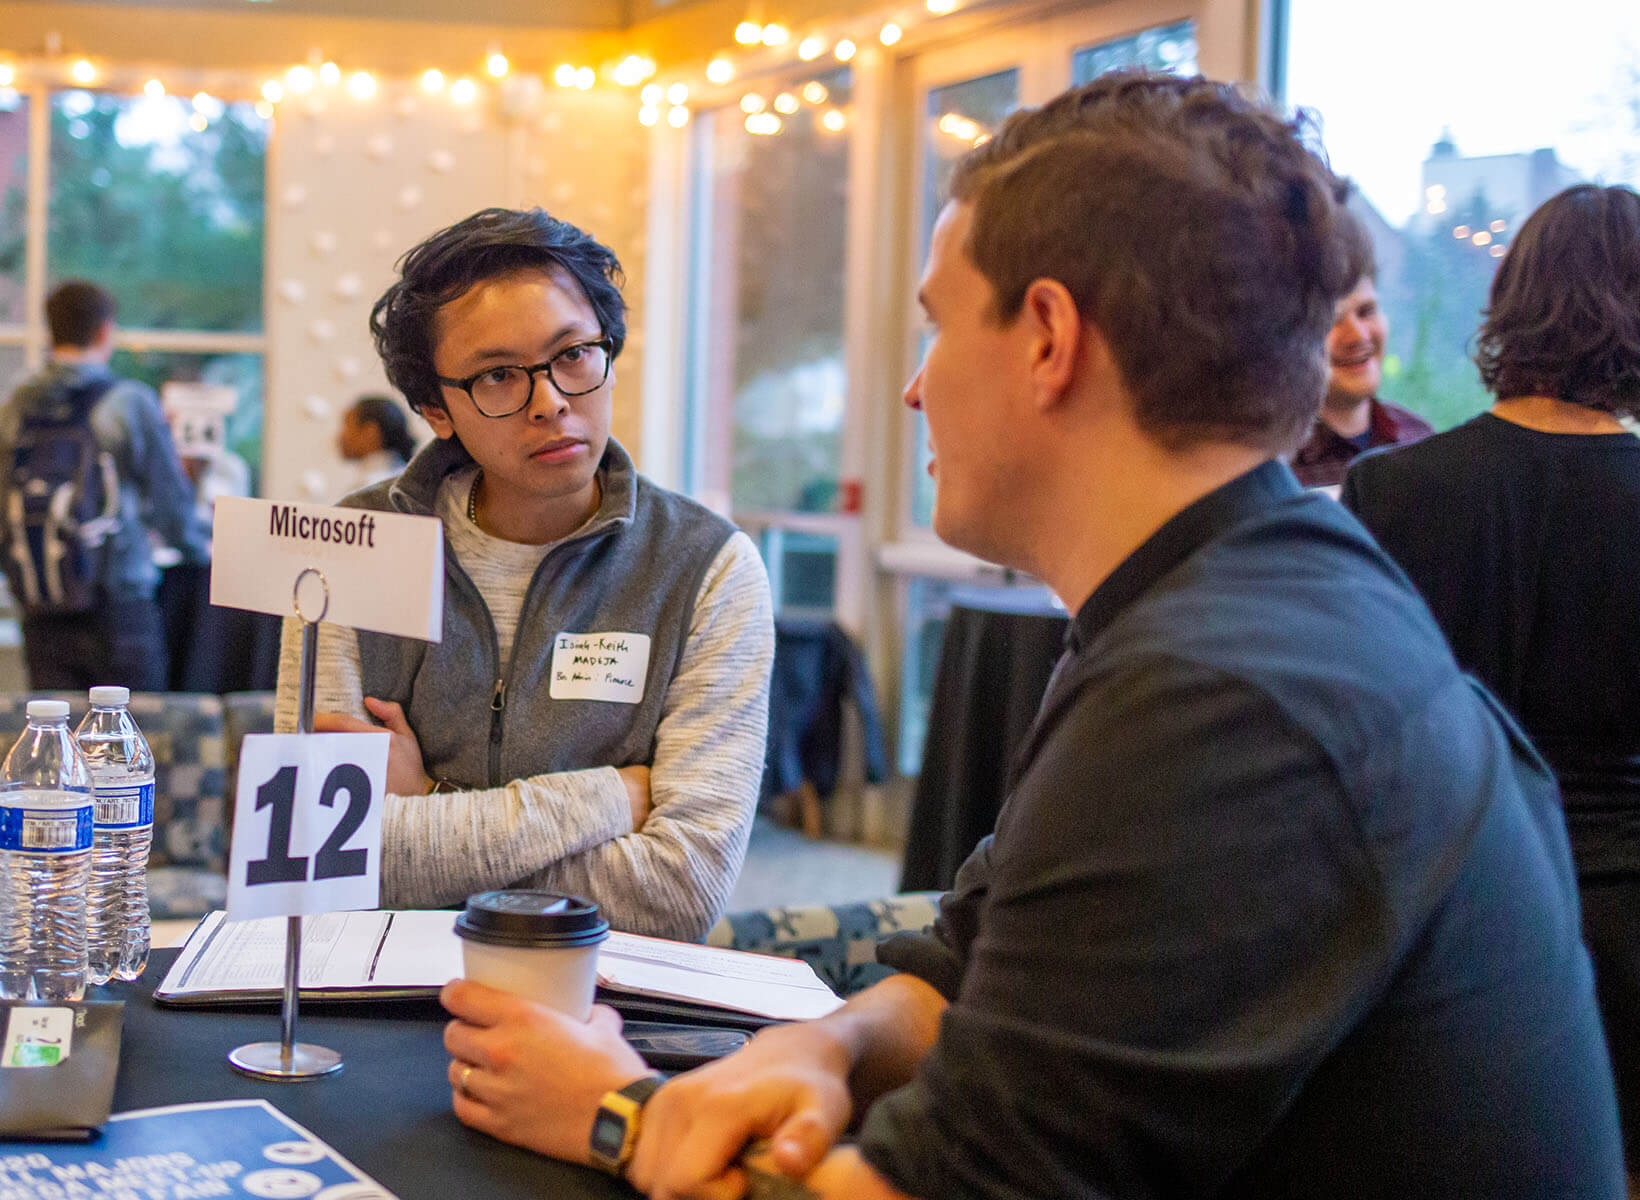 An SPU student attends a networking event on campus